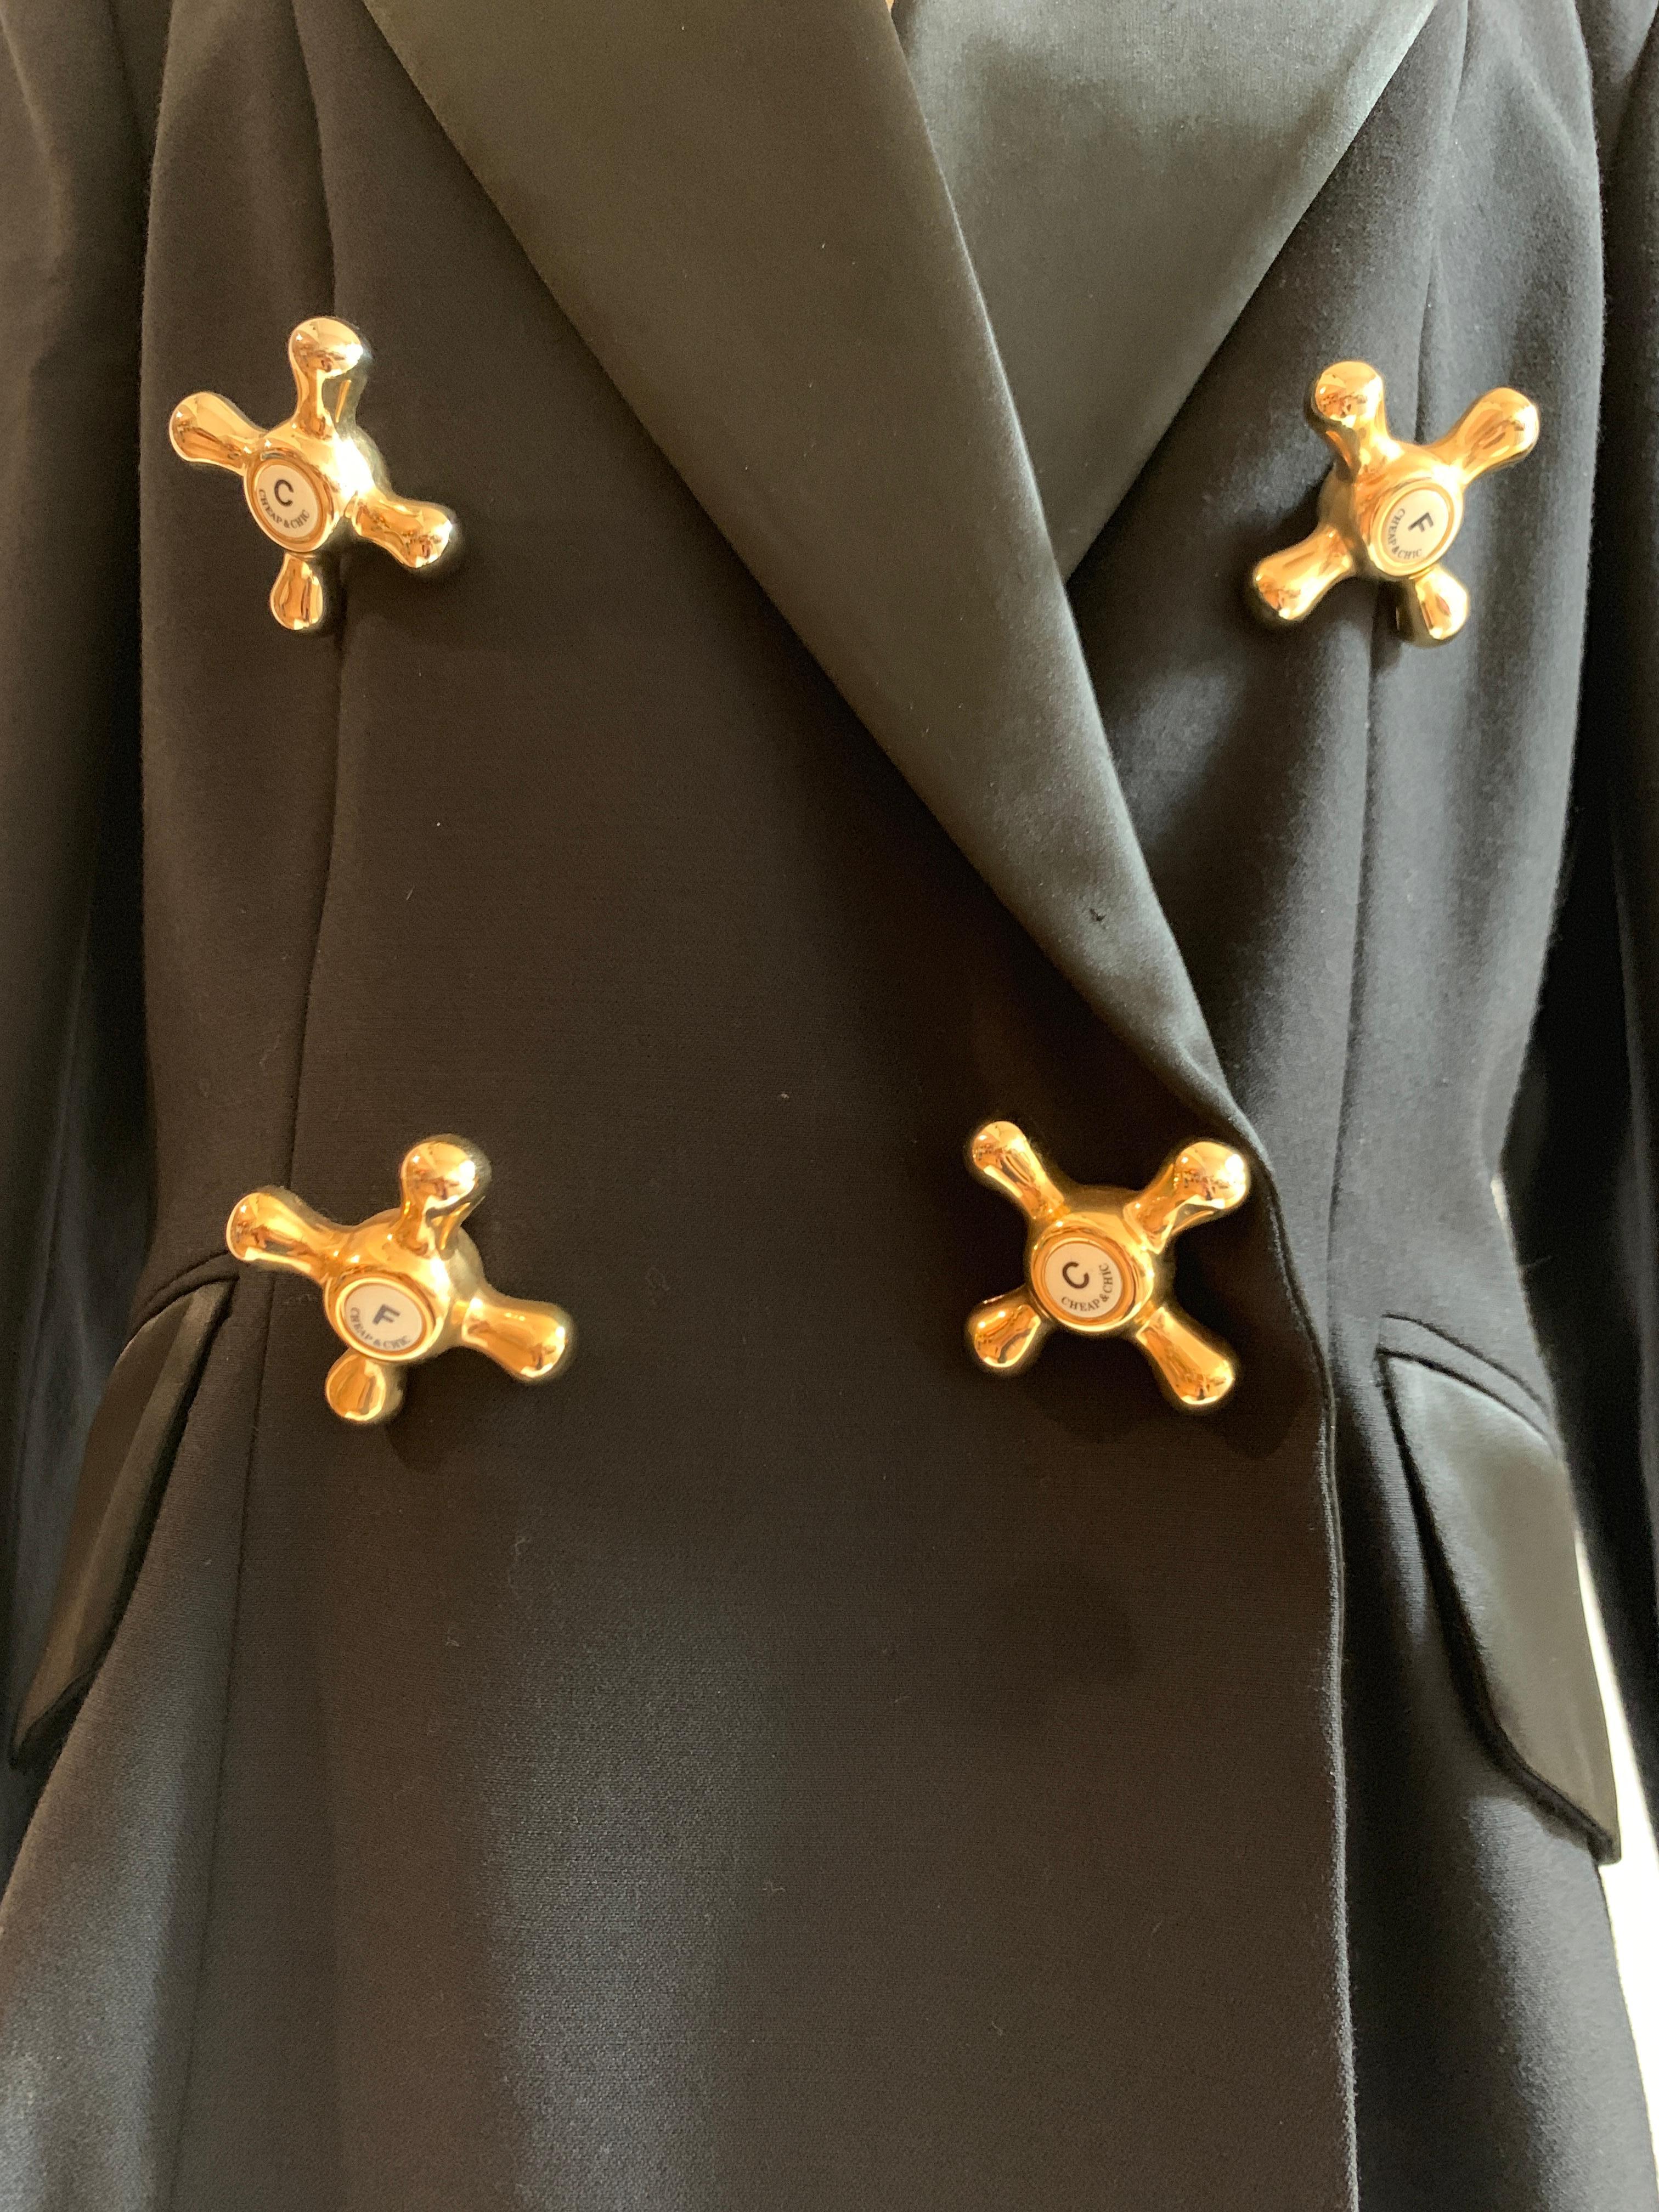 Moschino Cheap & Chic Vintage 90s Faucet Embellished Black Tuxedo Jacket Blazer In Good Condition In San Francisco, CA